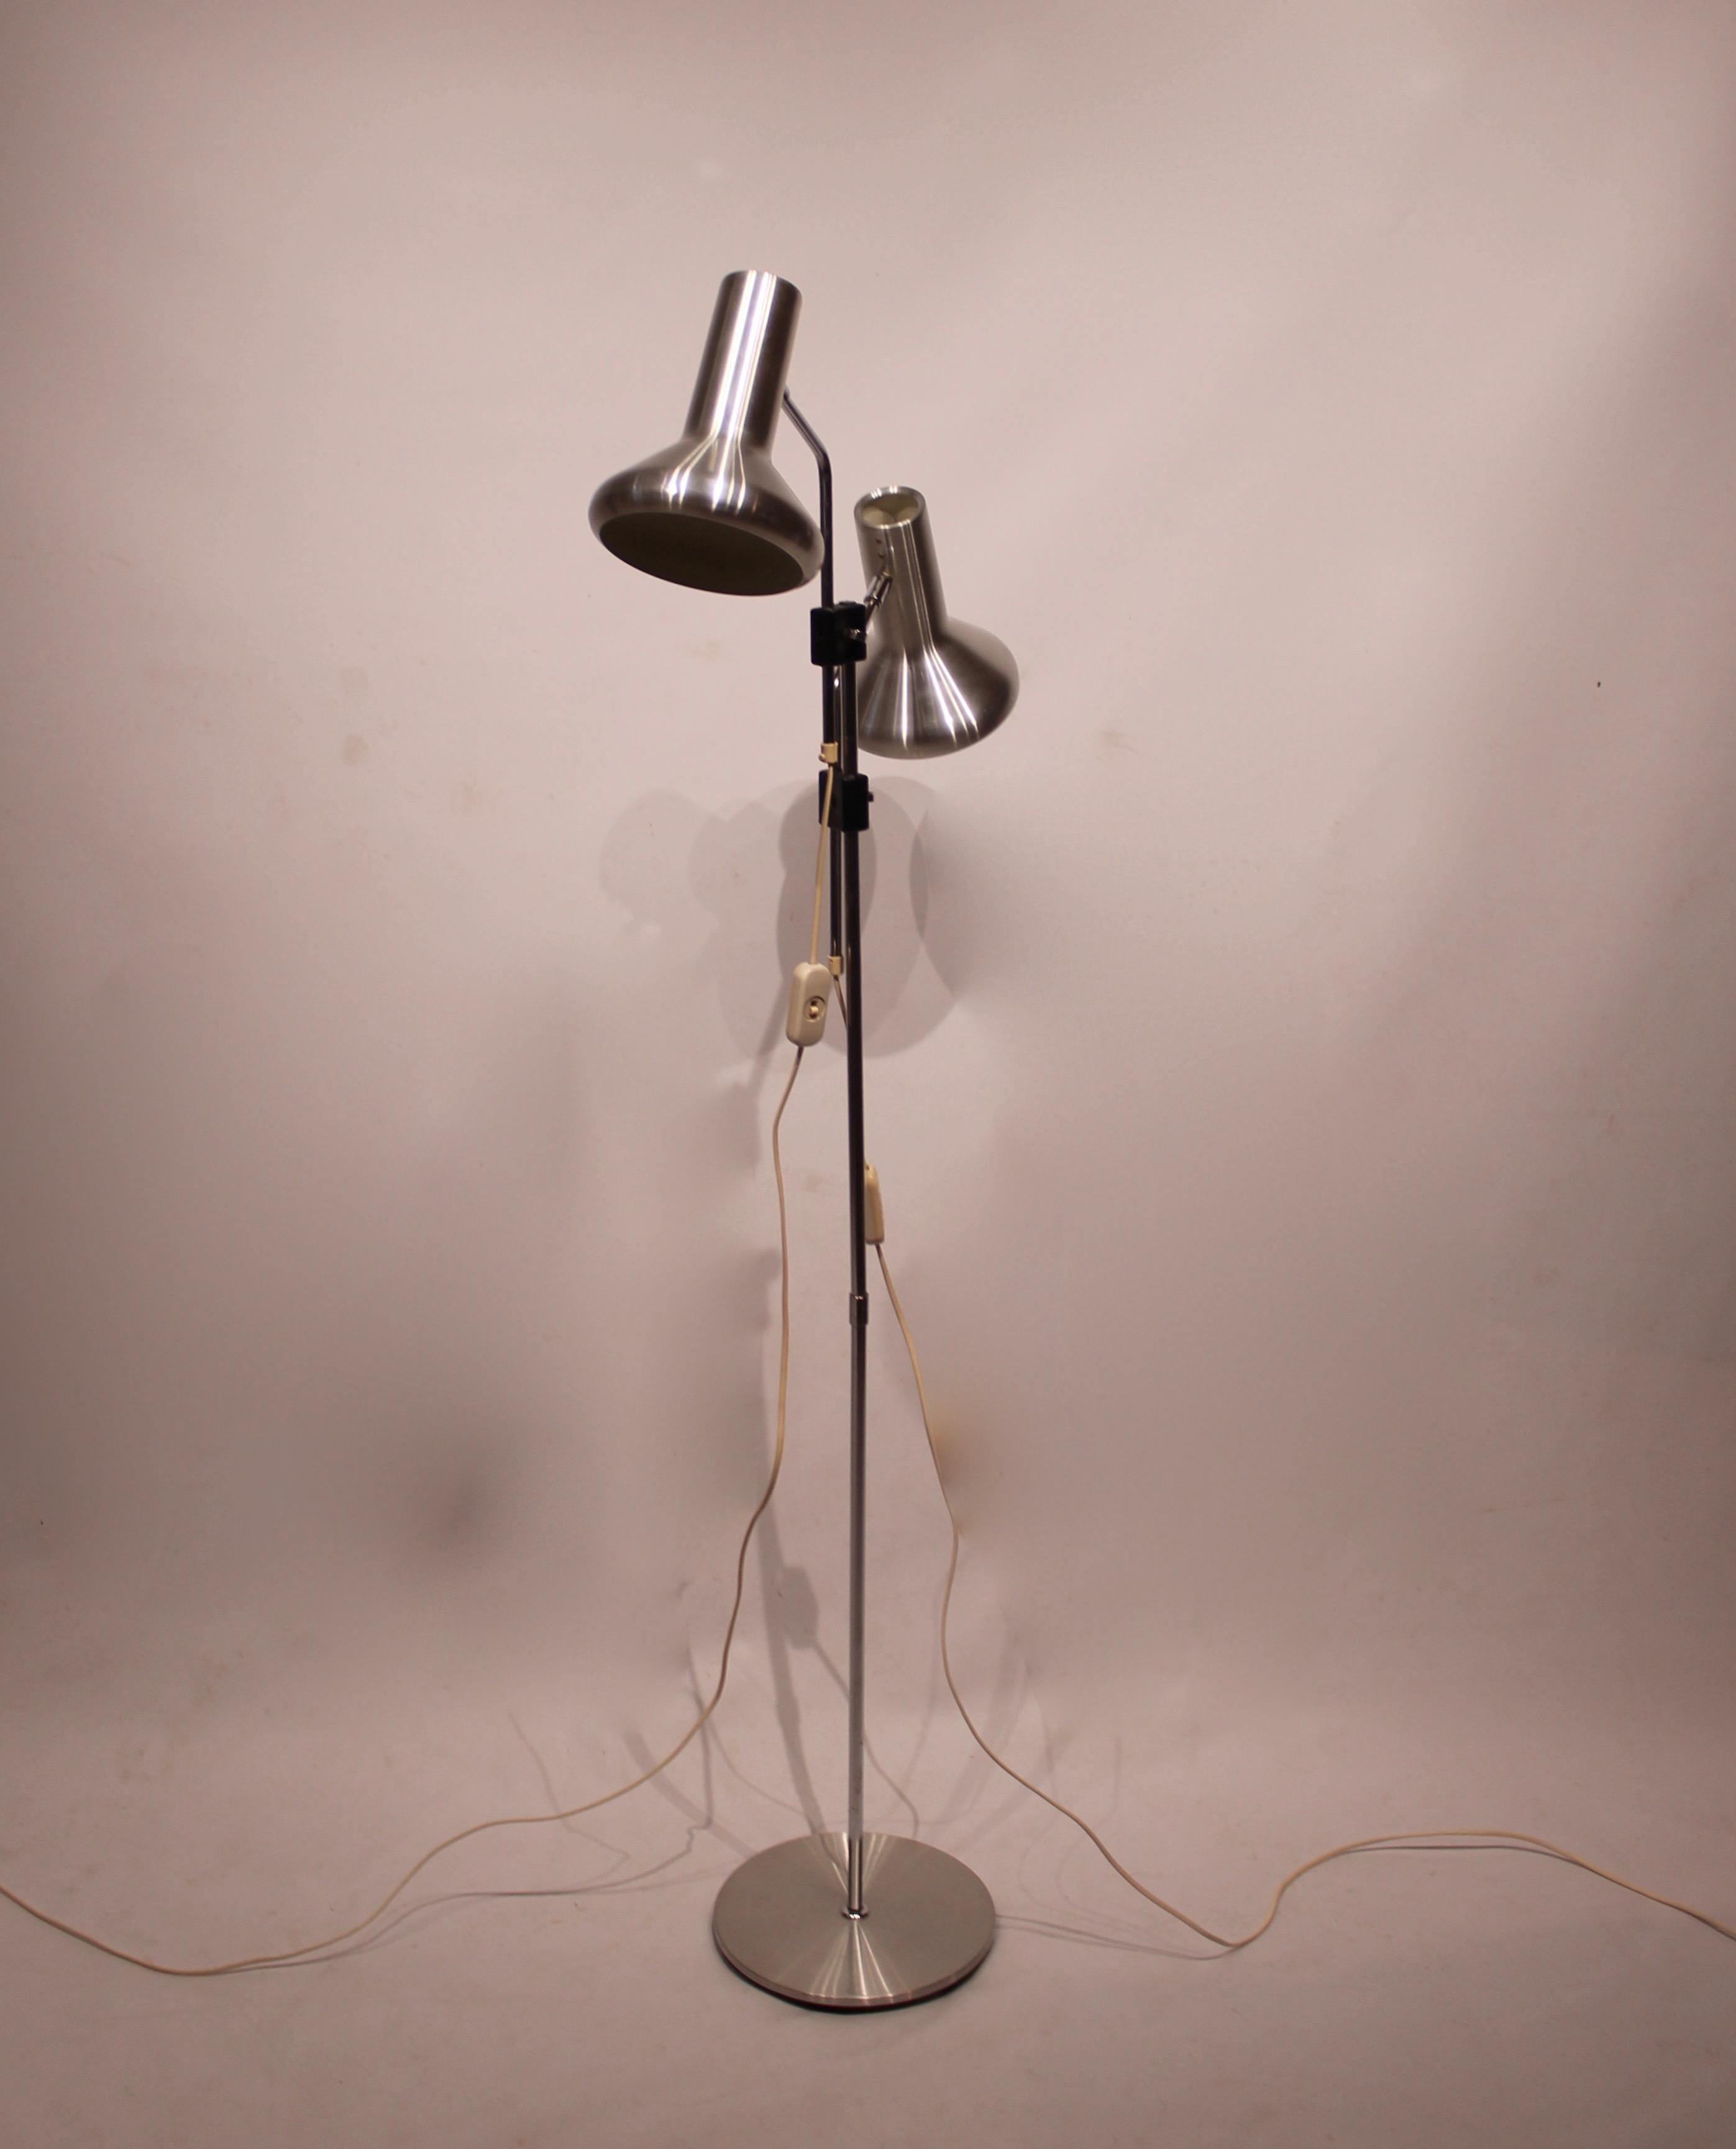 Floor lamp of steel and Danish design from the 1960s. The lamp is in great vintage condition.